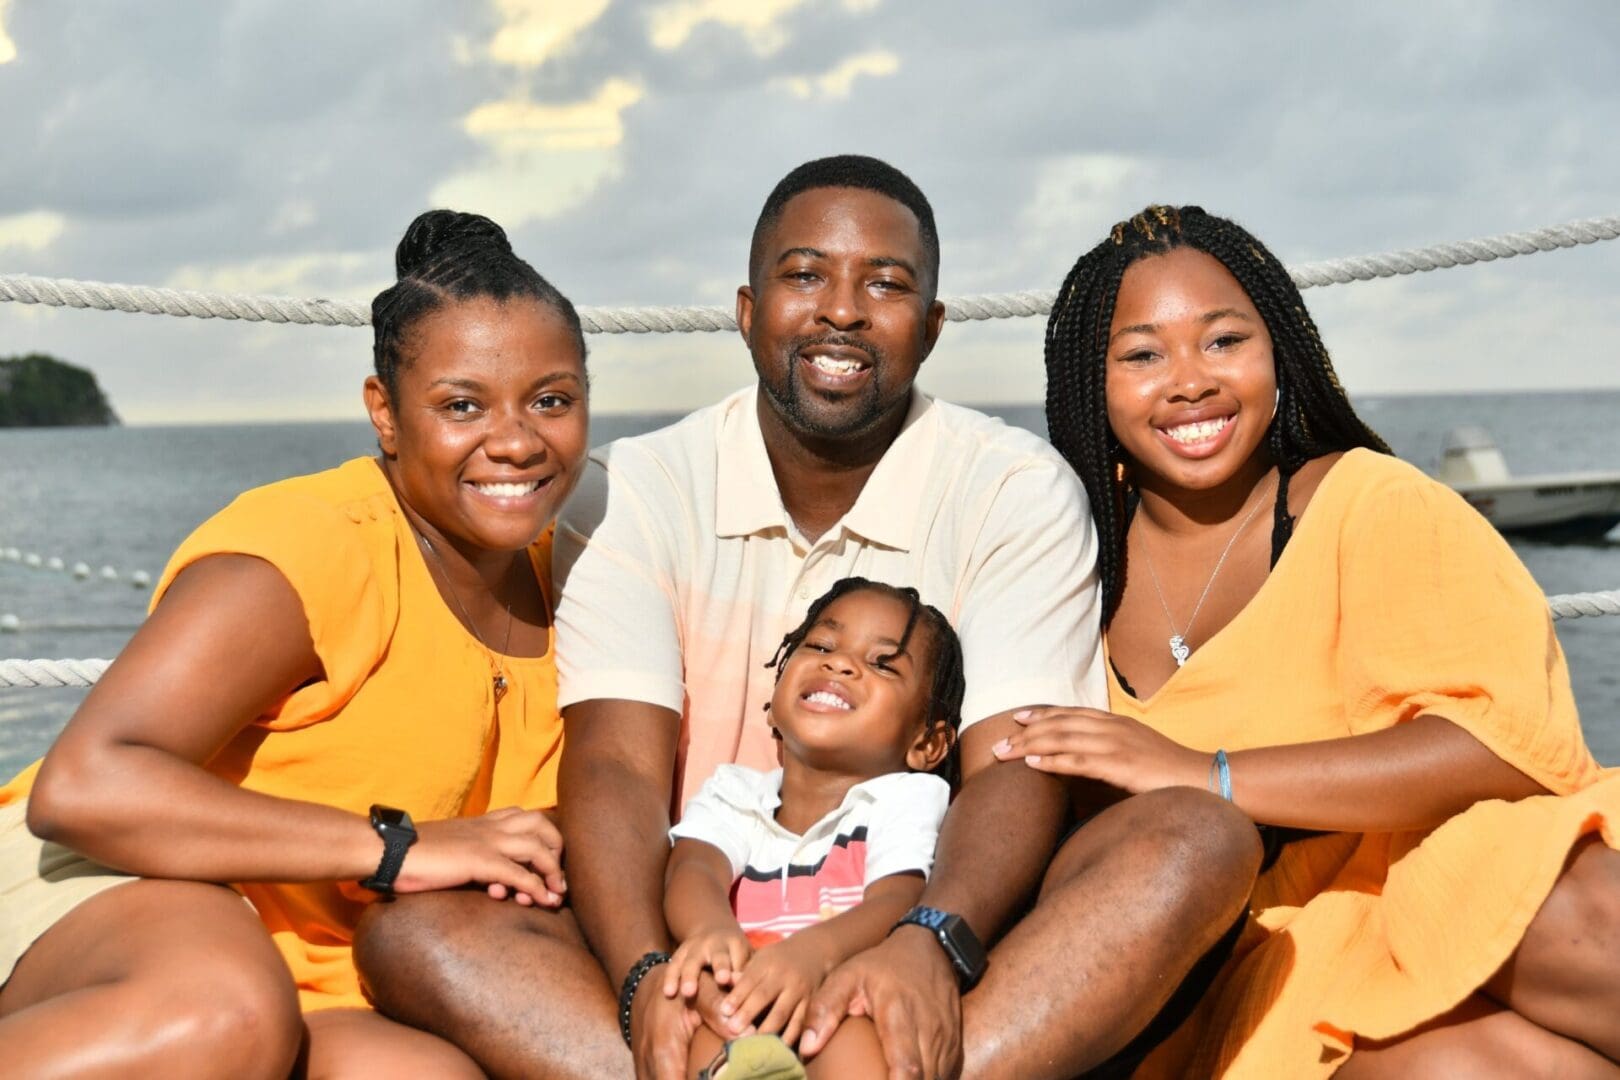 A family of four smiling and playing interactively for a photograph outdoors, dressed in coordinating colors by the water.